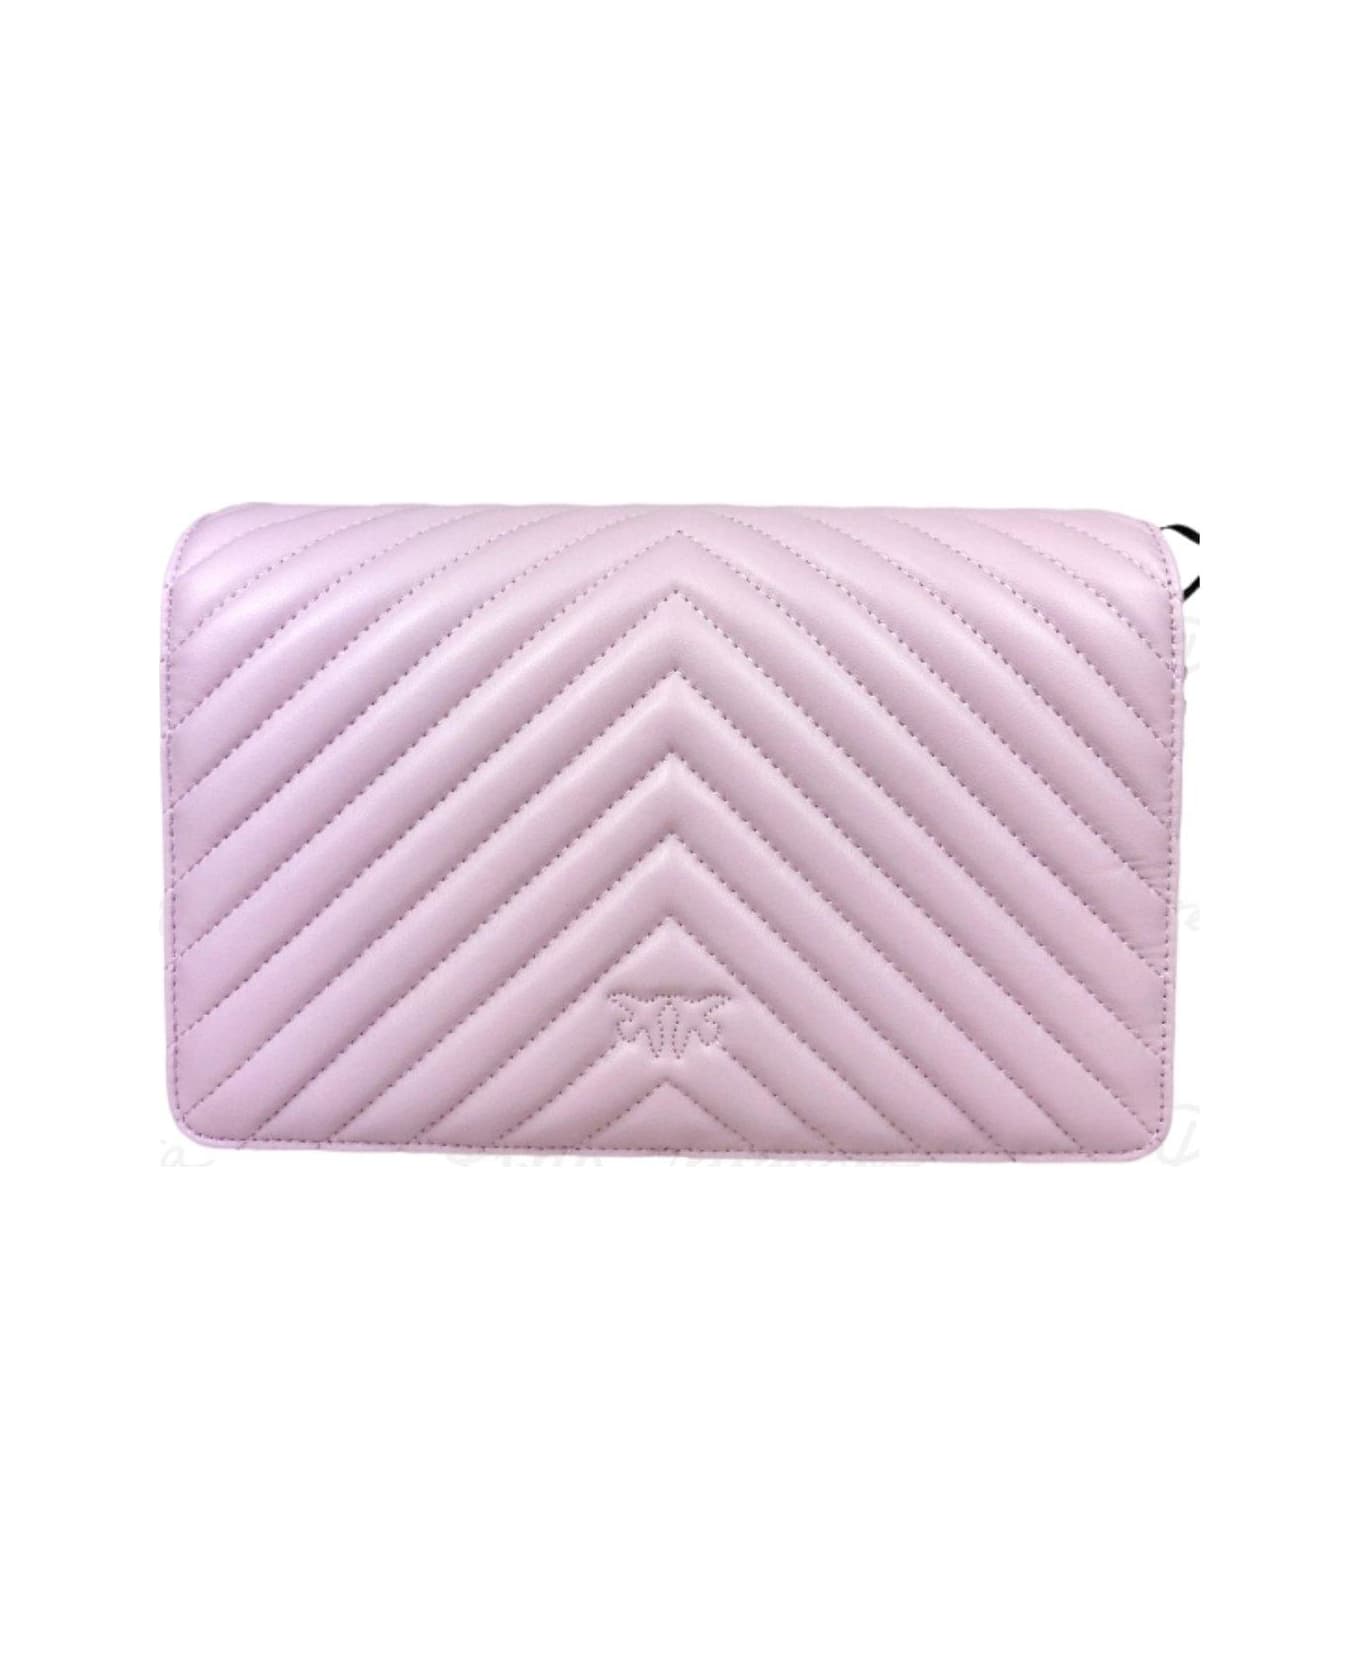 Pinko Classic Click V-quilted Shoulder Bag - Wwgq Purple